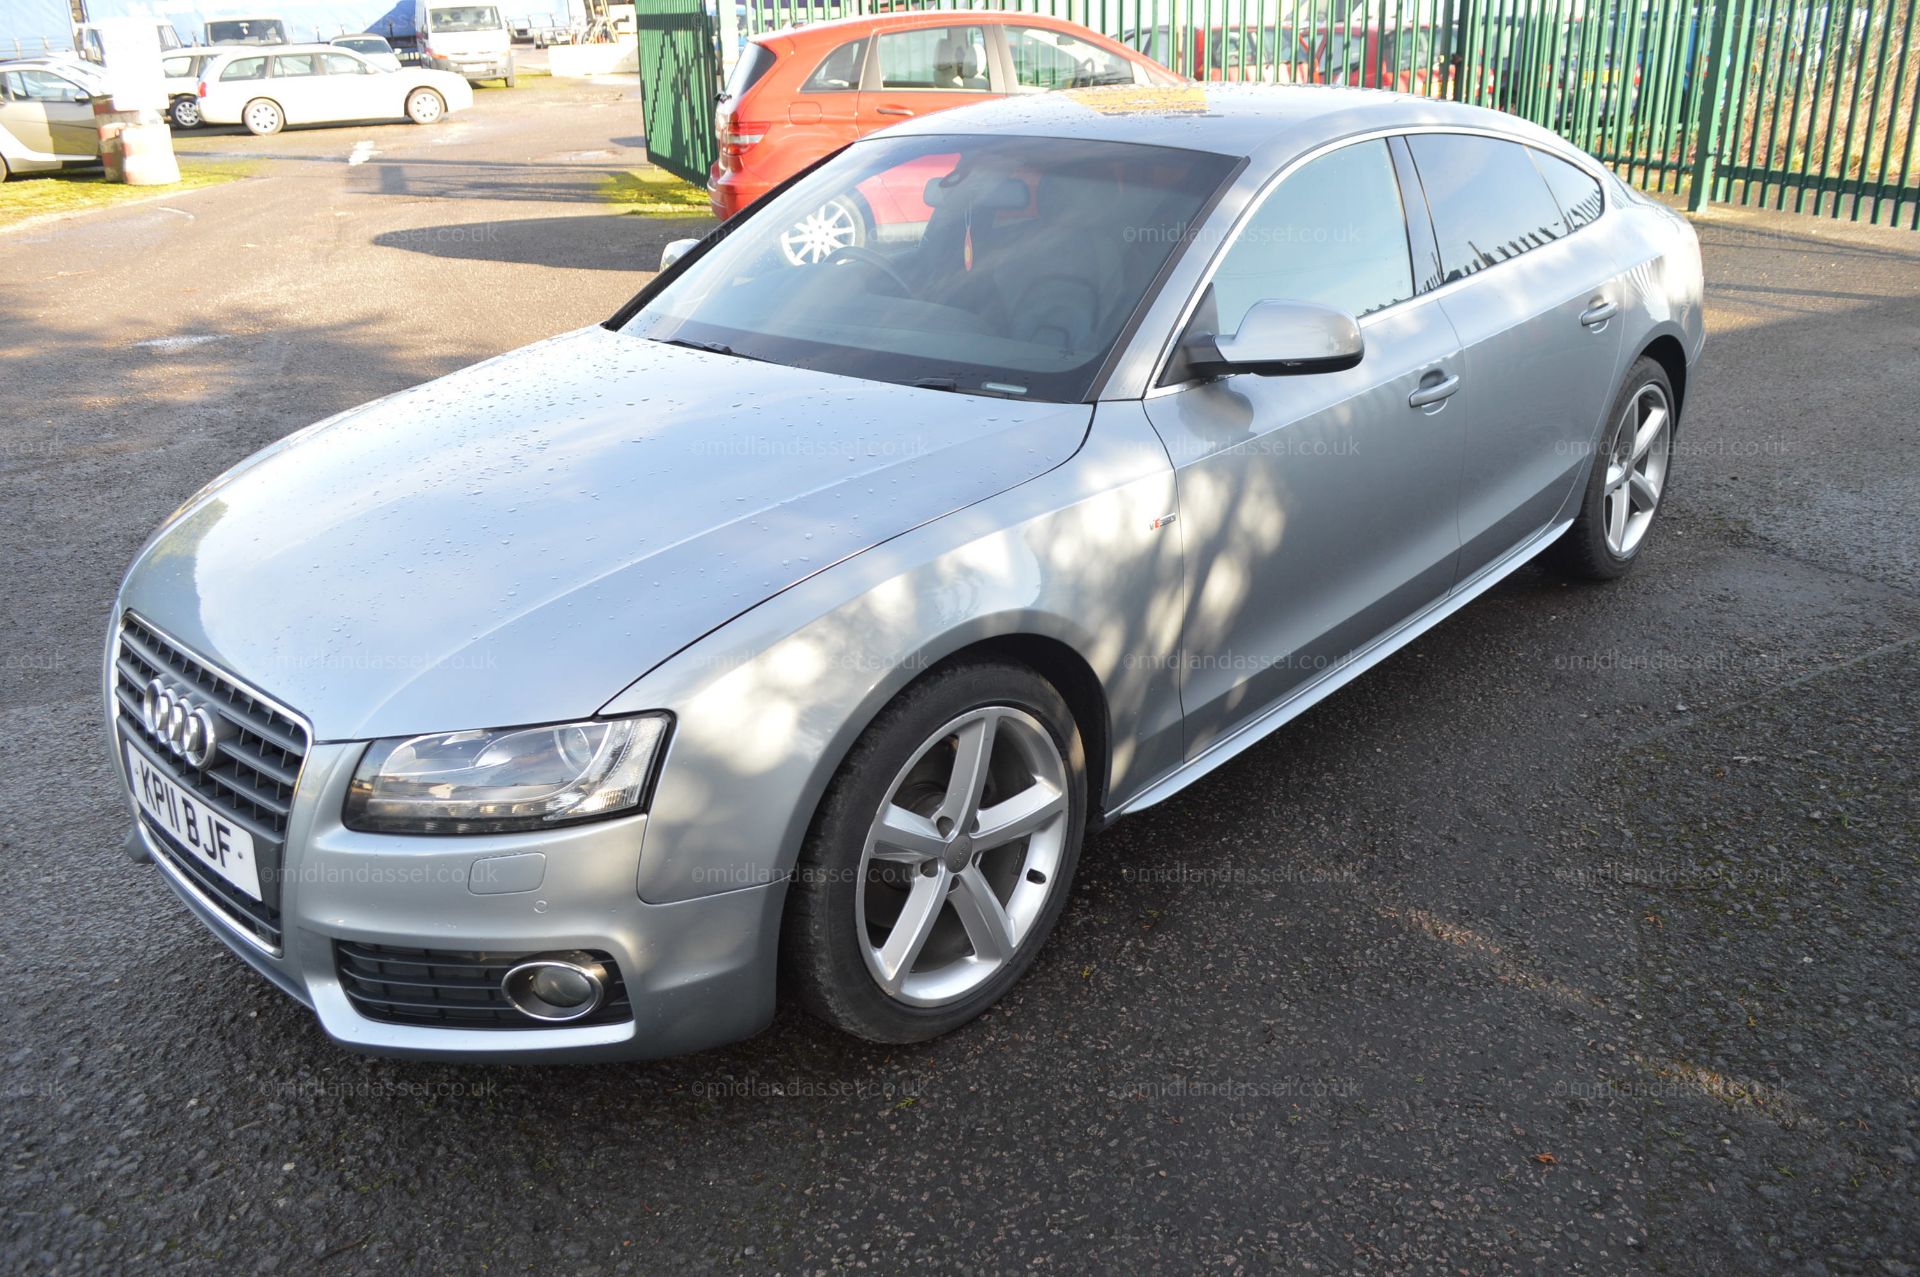 NR - 2011/11 REG AUDI A5 S LINE TDI, SERVICE HISTORY, 2 FORMER KEEPERS - Image 3 of 28